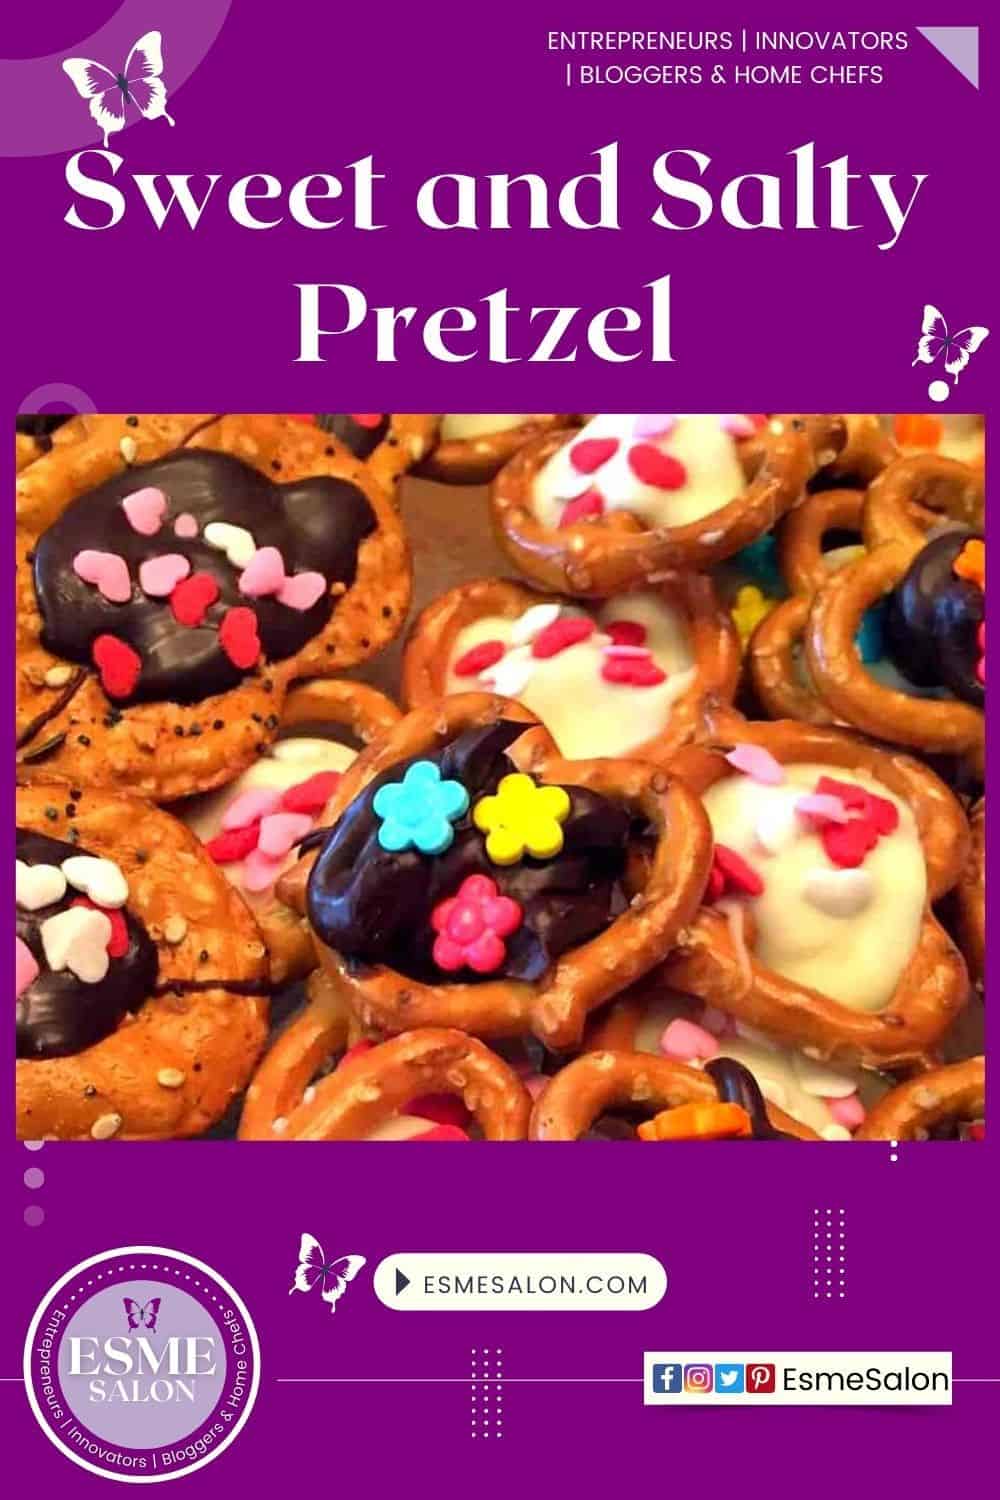 Salty Pretzels with chocolate filling and decorated with sugar heart candies